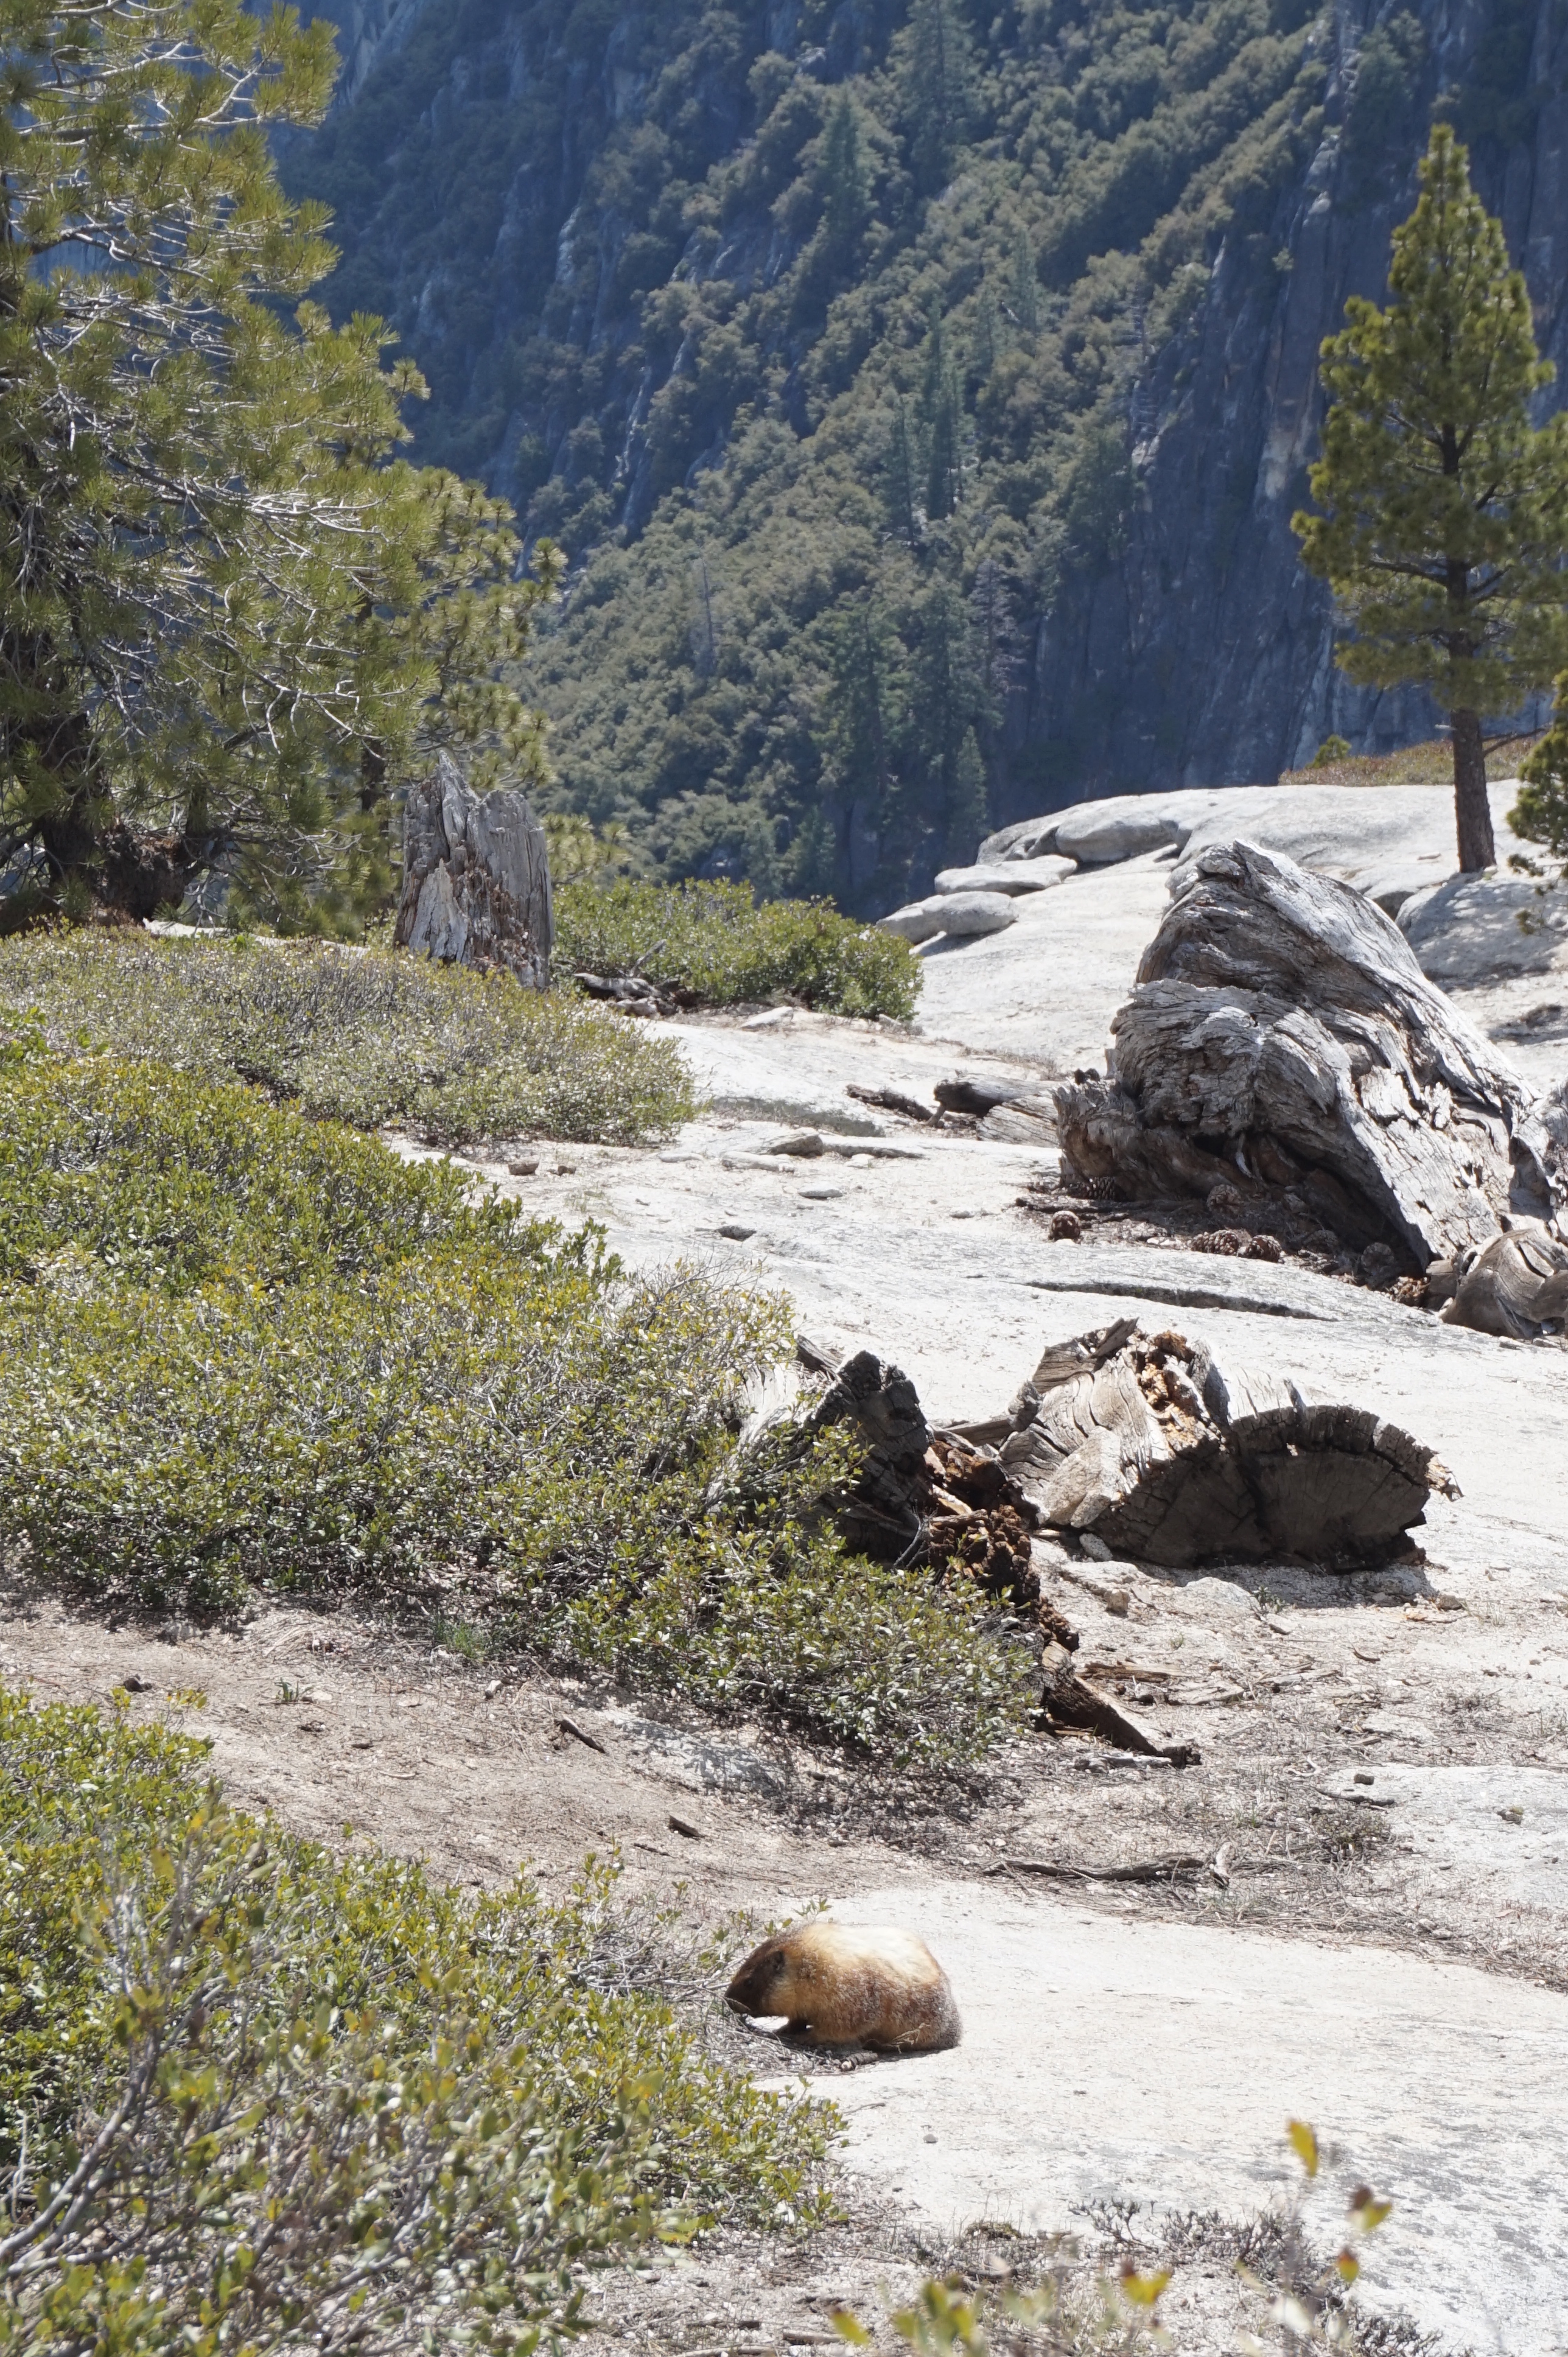 We spotted a yellow-belly marmot at Yosemite Point! I also later saw a bear casually crossing the street near Half Dome Village, but wasn't quick enough to pull out my camera. Tourists and rangers chased after it.